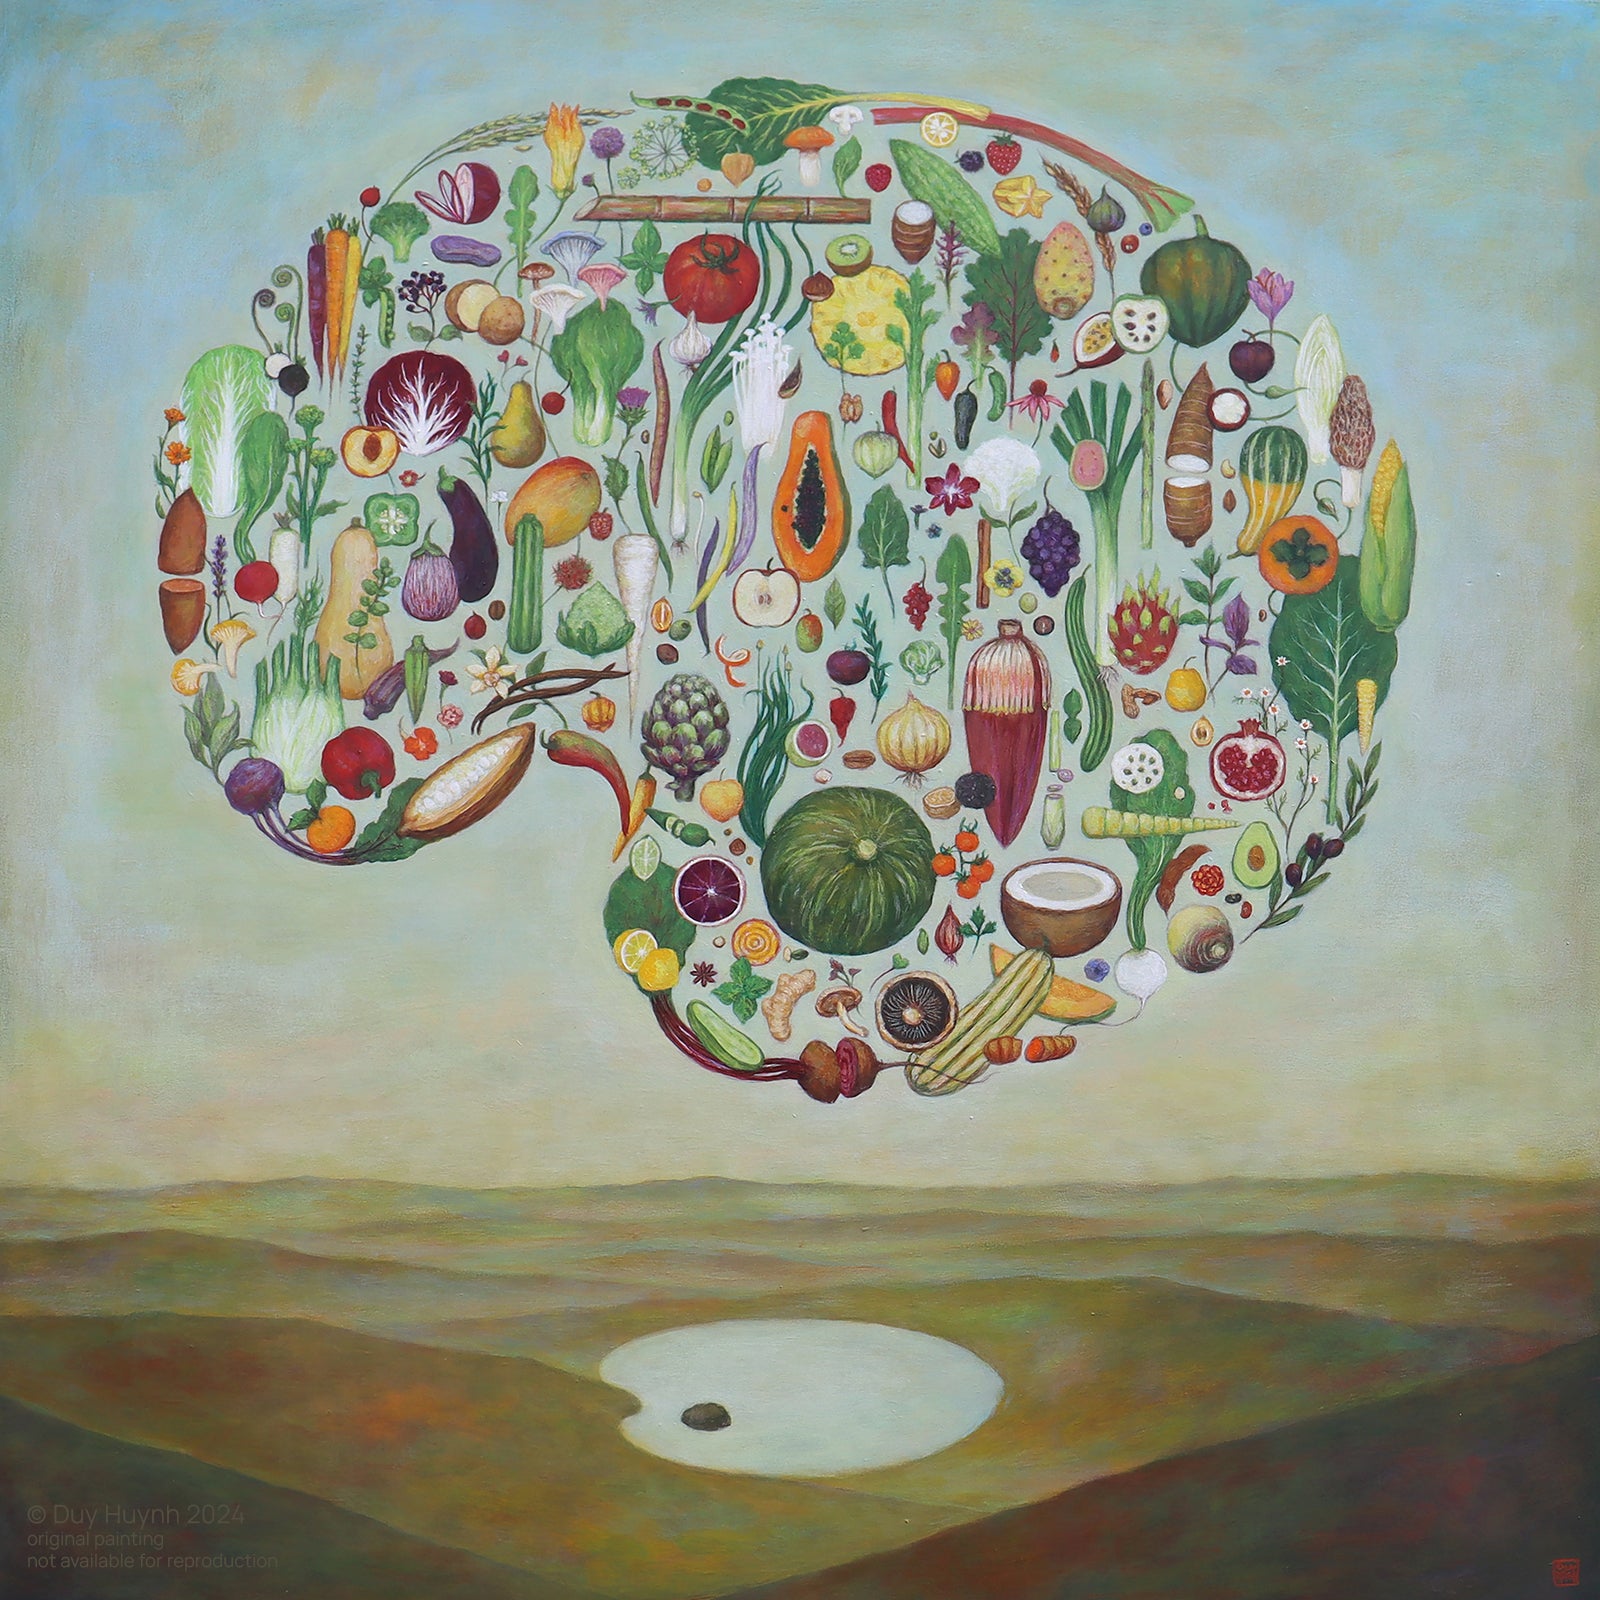 Artist Duy Huynh 's painting called "Palate to Palette". A brain shaped form comprised of fruits and vegetables floats over an open landscape with a lake shaped like an artist's palette. This painting is a nod to farmers and farmer's markets and the visual appeal of food. Available at Lark & Key, Charlotte NC.